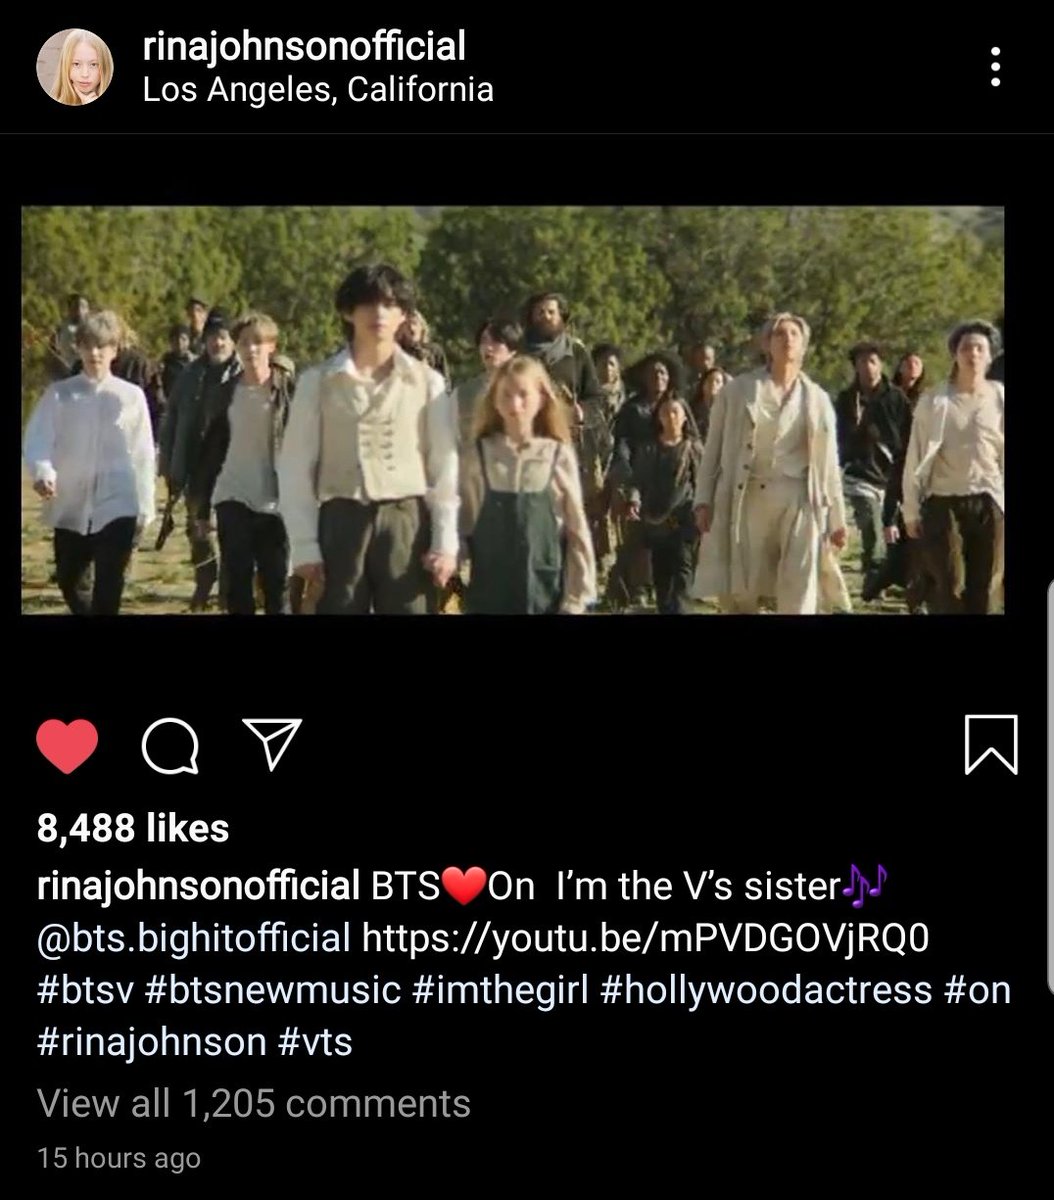 Bts V Uk Taehyungmedia Instagram The Little Girl From On Mv Who Was Seen Playing Taehyung S Sister Posted Pictures Working With Taehyung For On Mv T Co Icw7wyrizq Bts Twt Taehyung